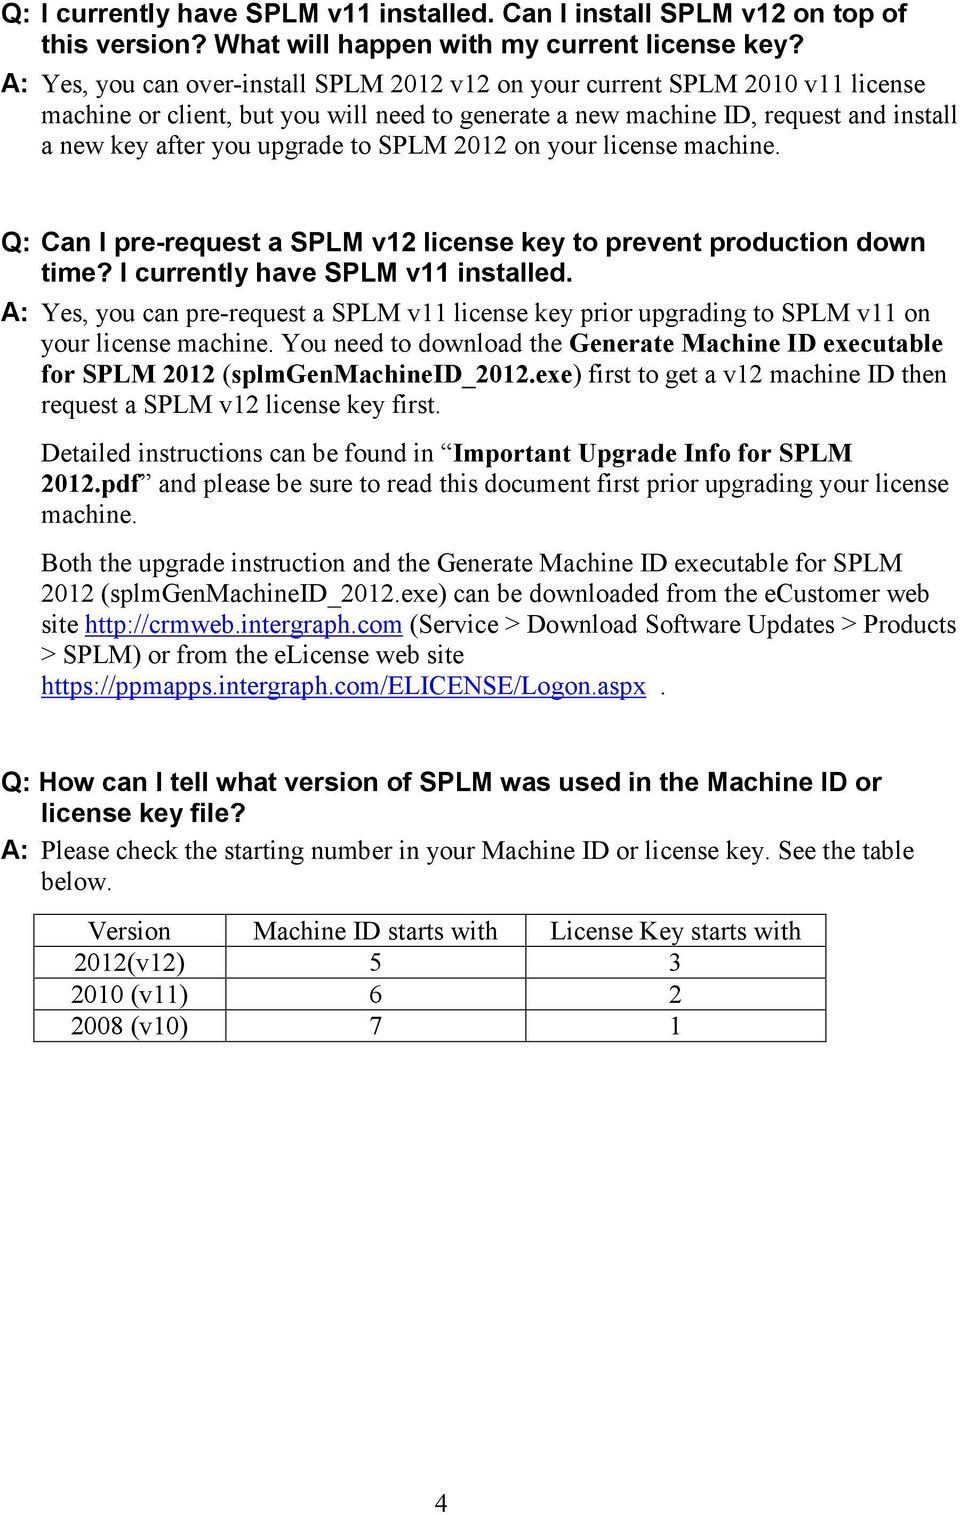 SPLM 2012 on your license machine. Q: Can I pre-request a SPLM v12 license key to prevent production down time? I currently have SPLM v11 installed.